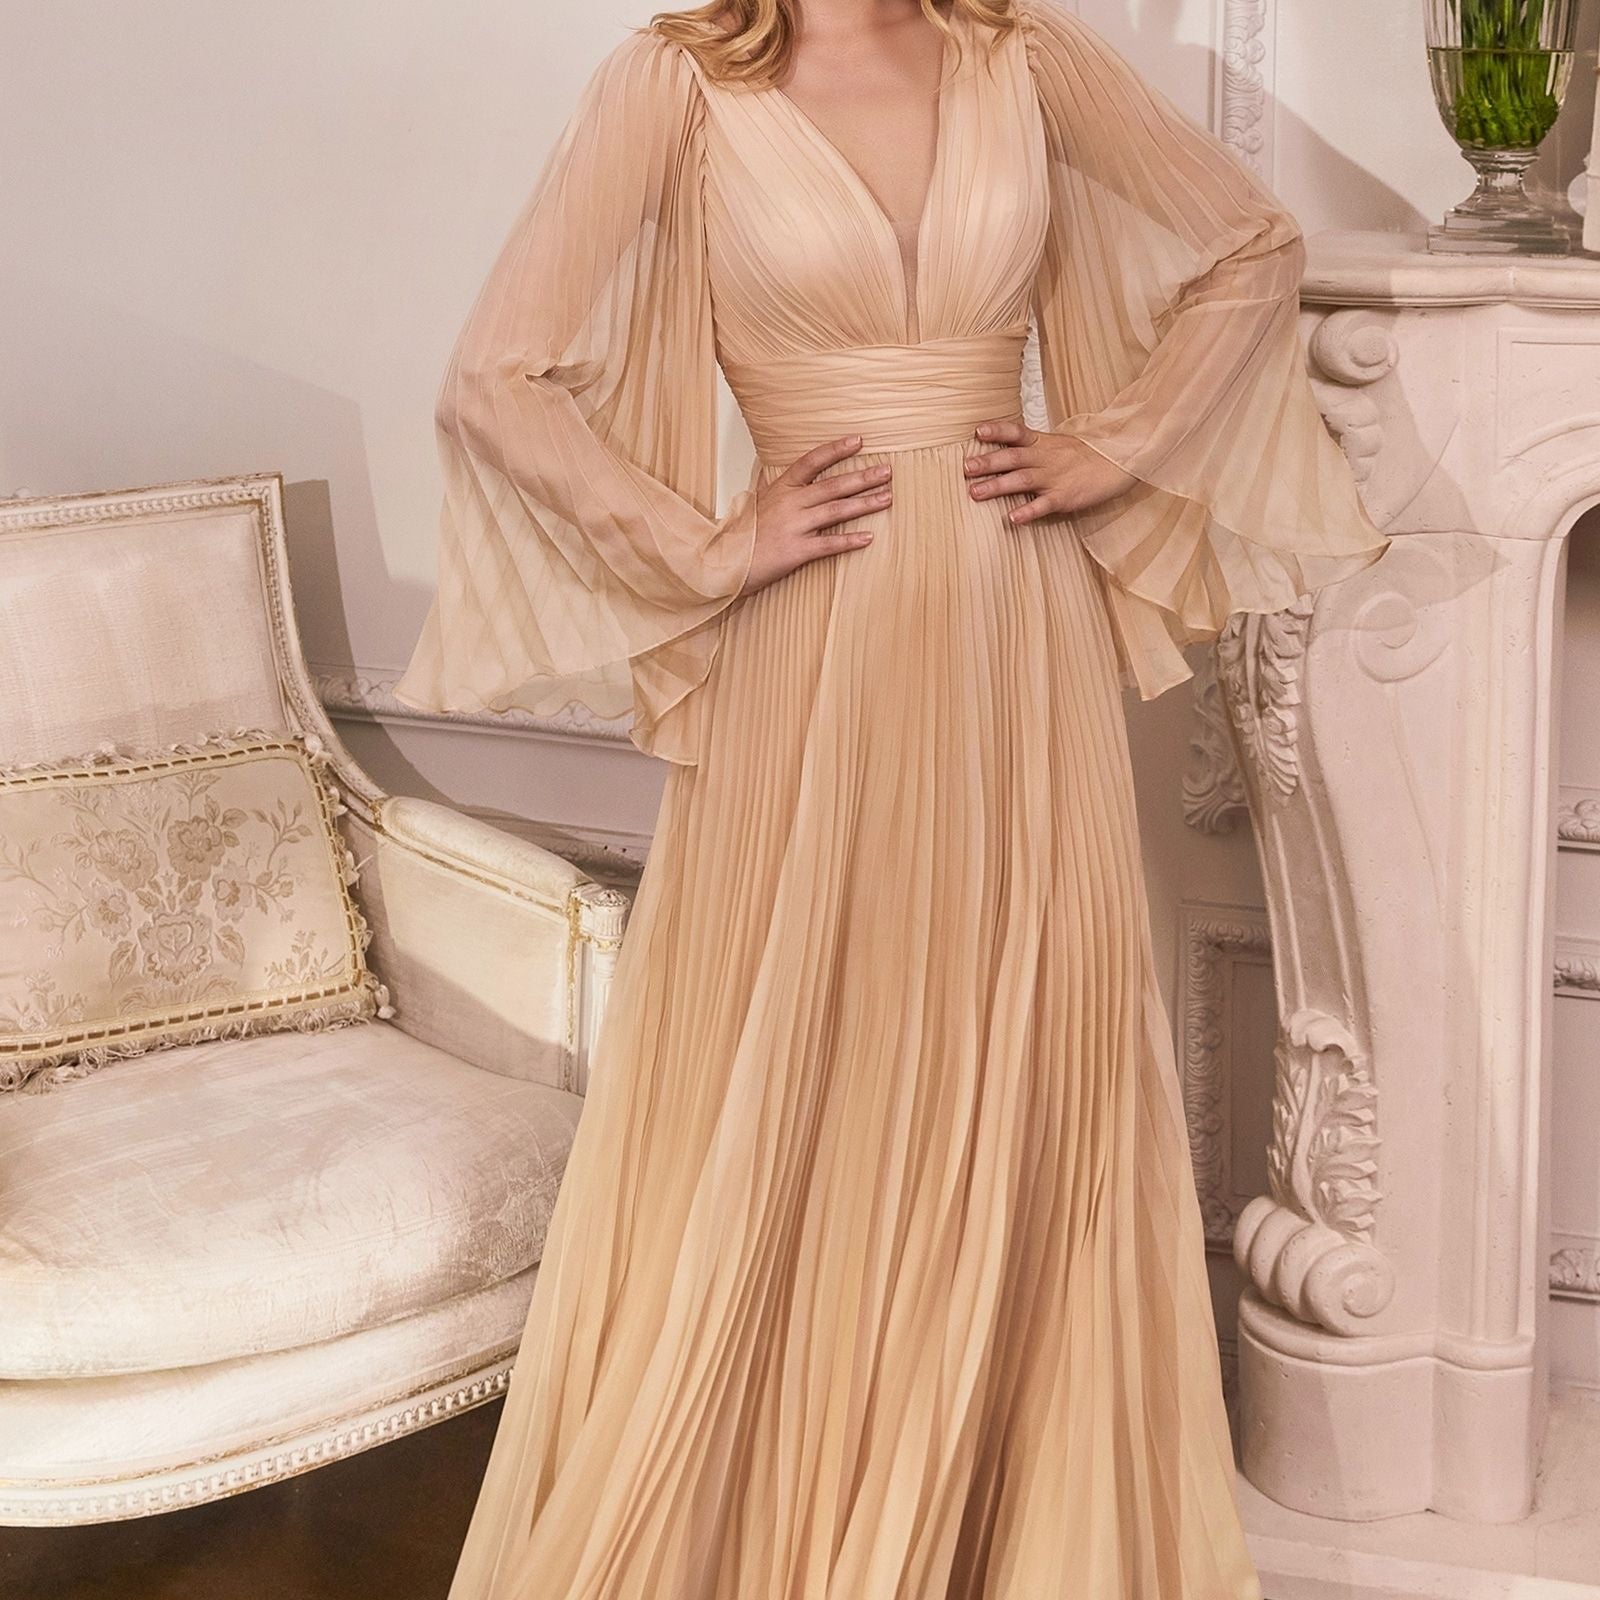 Pleated Chiffon Gown with Deep V-neckline, perfect for Mother of the Bride!-smcdress